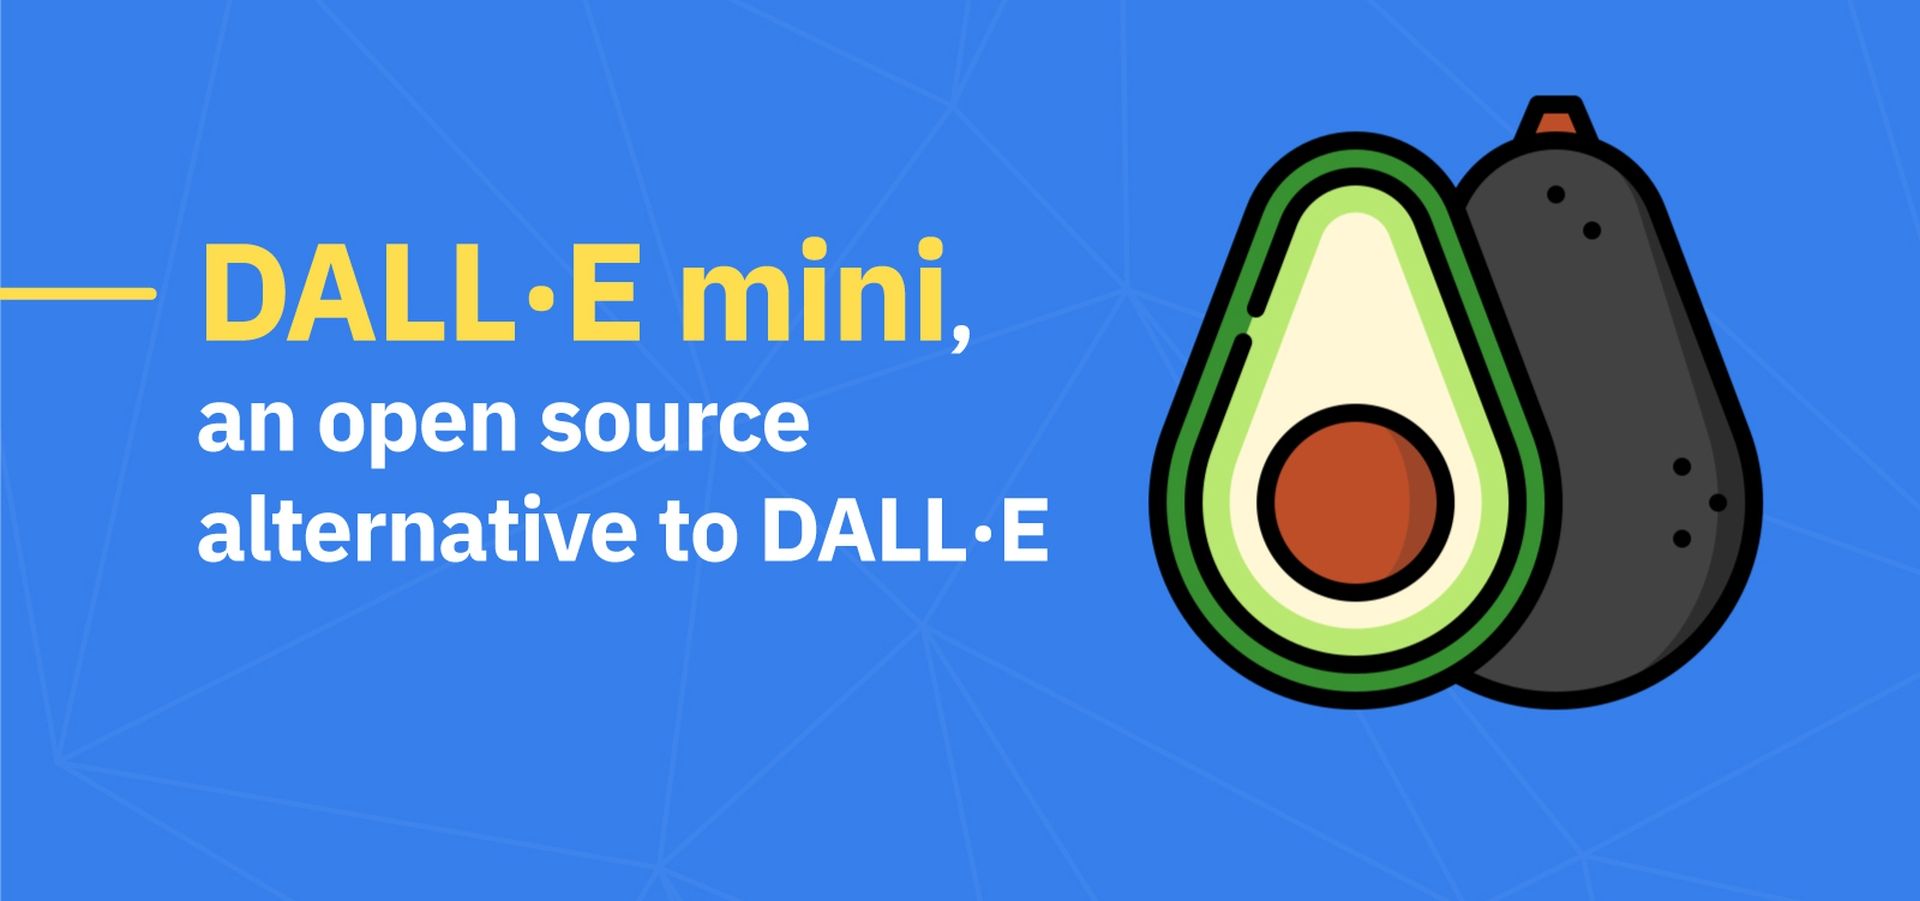 Today, we are covering how long does DallE Mini take, as there are many who see Dall E mini too much traffic error while taking part in this AI image generator meme.